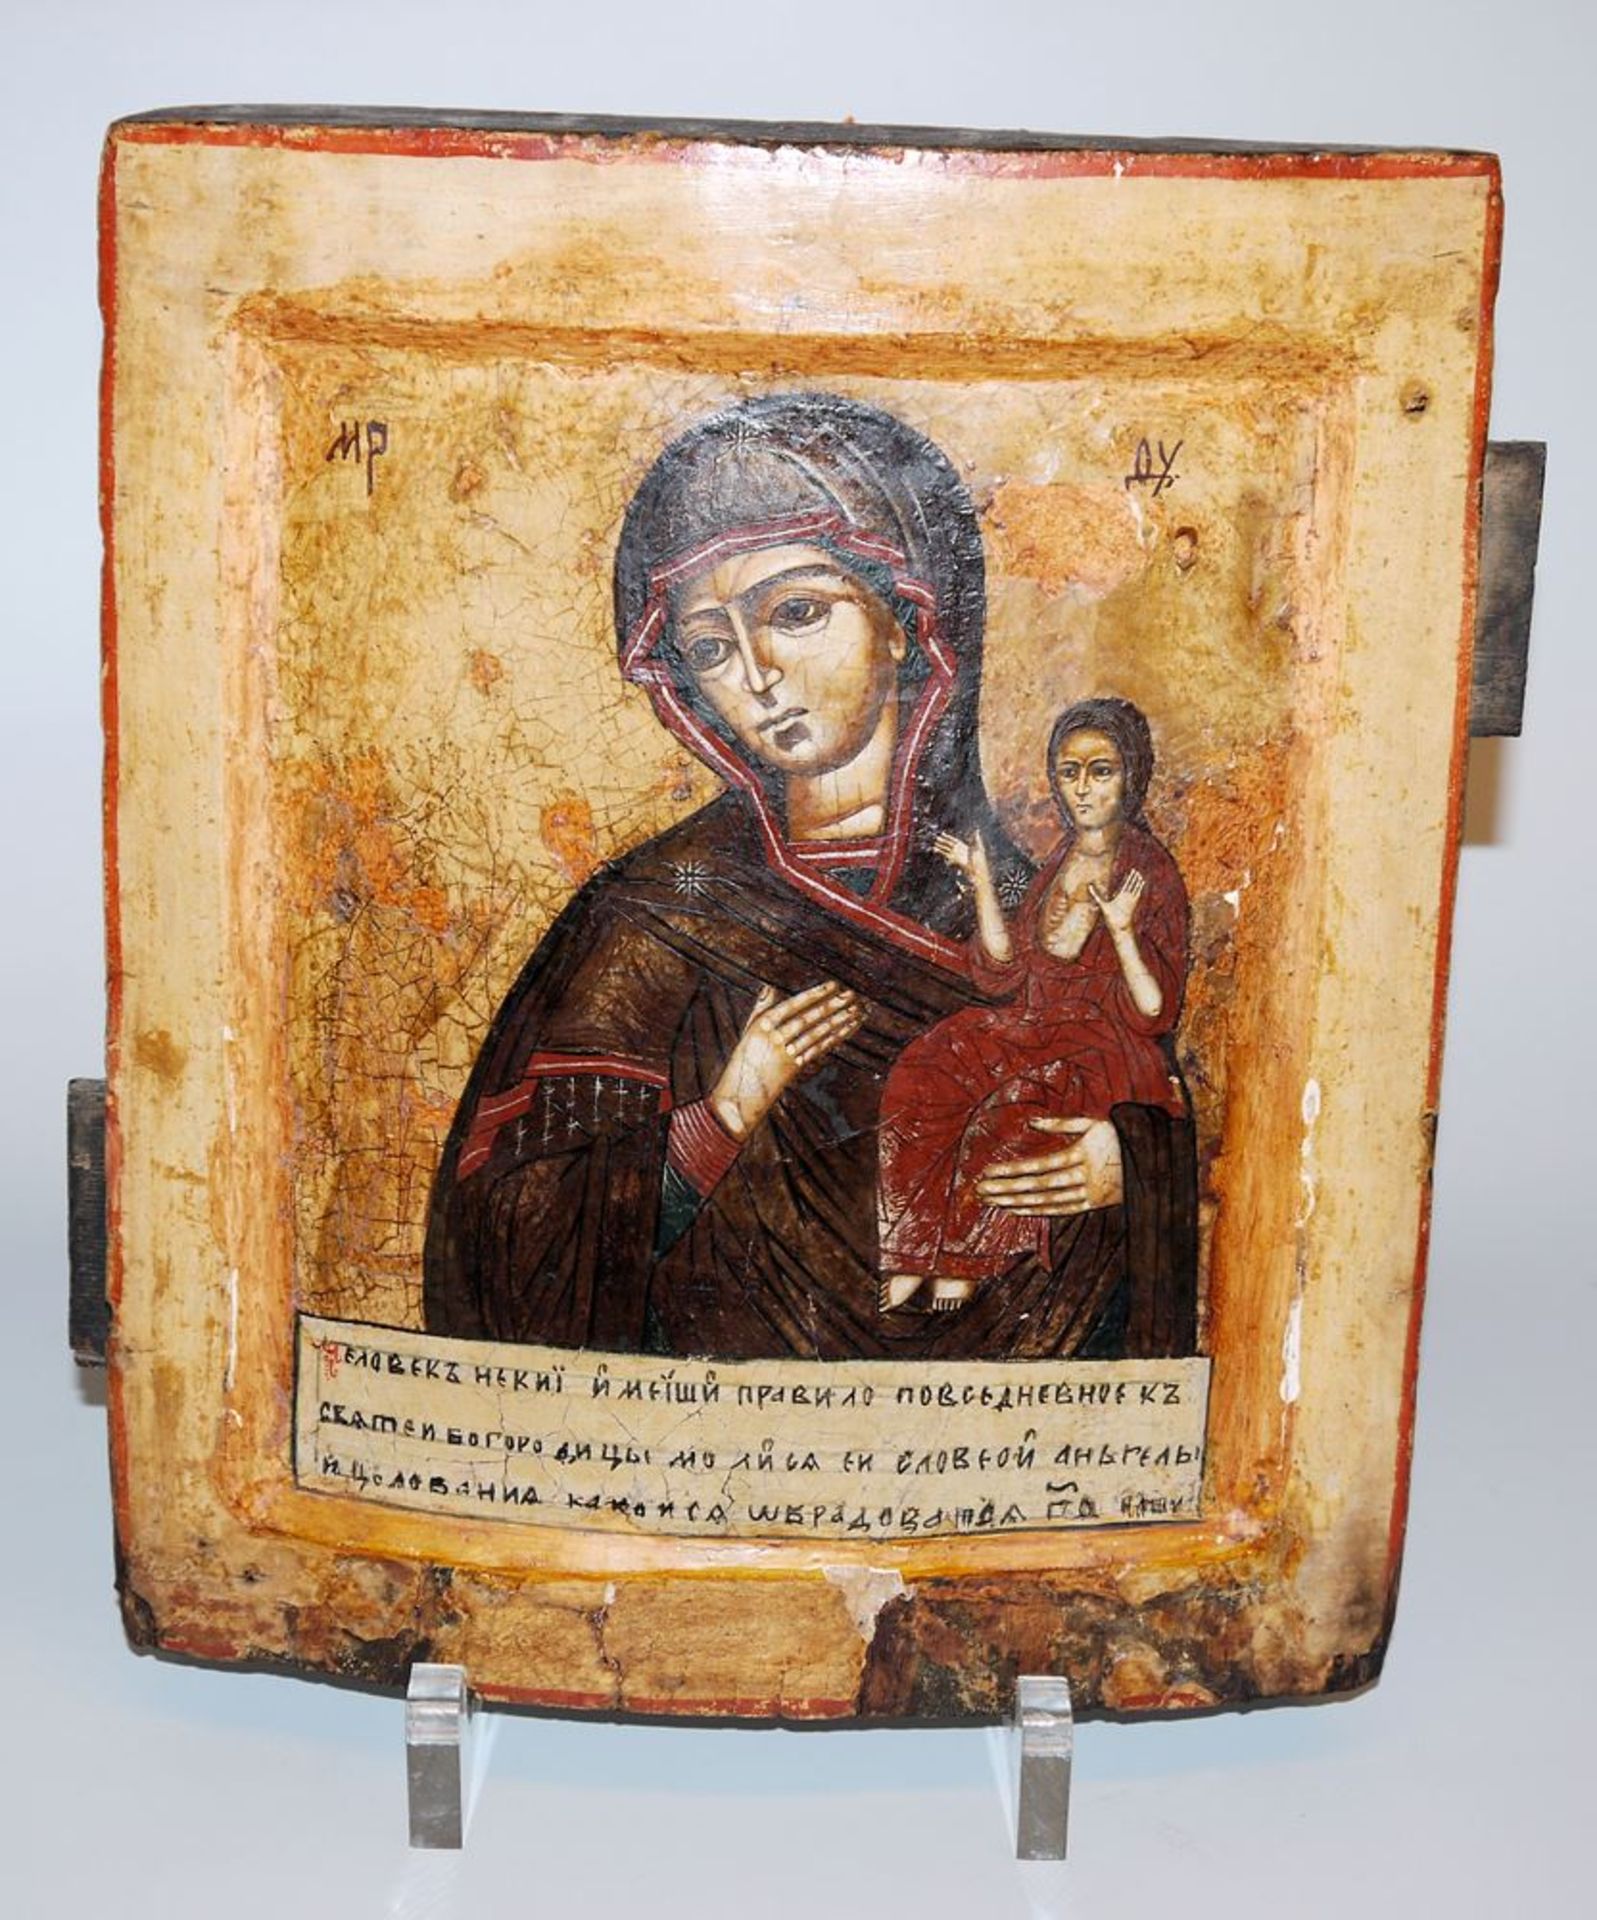 Mother of God with Child, Russian icon c. 1650 according to certificate